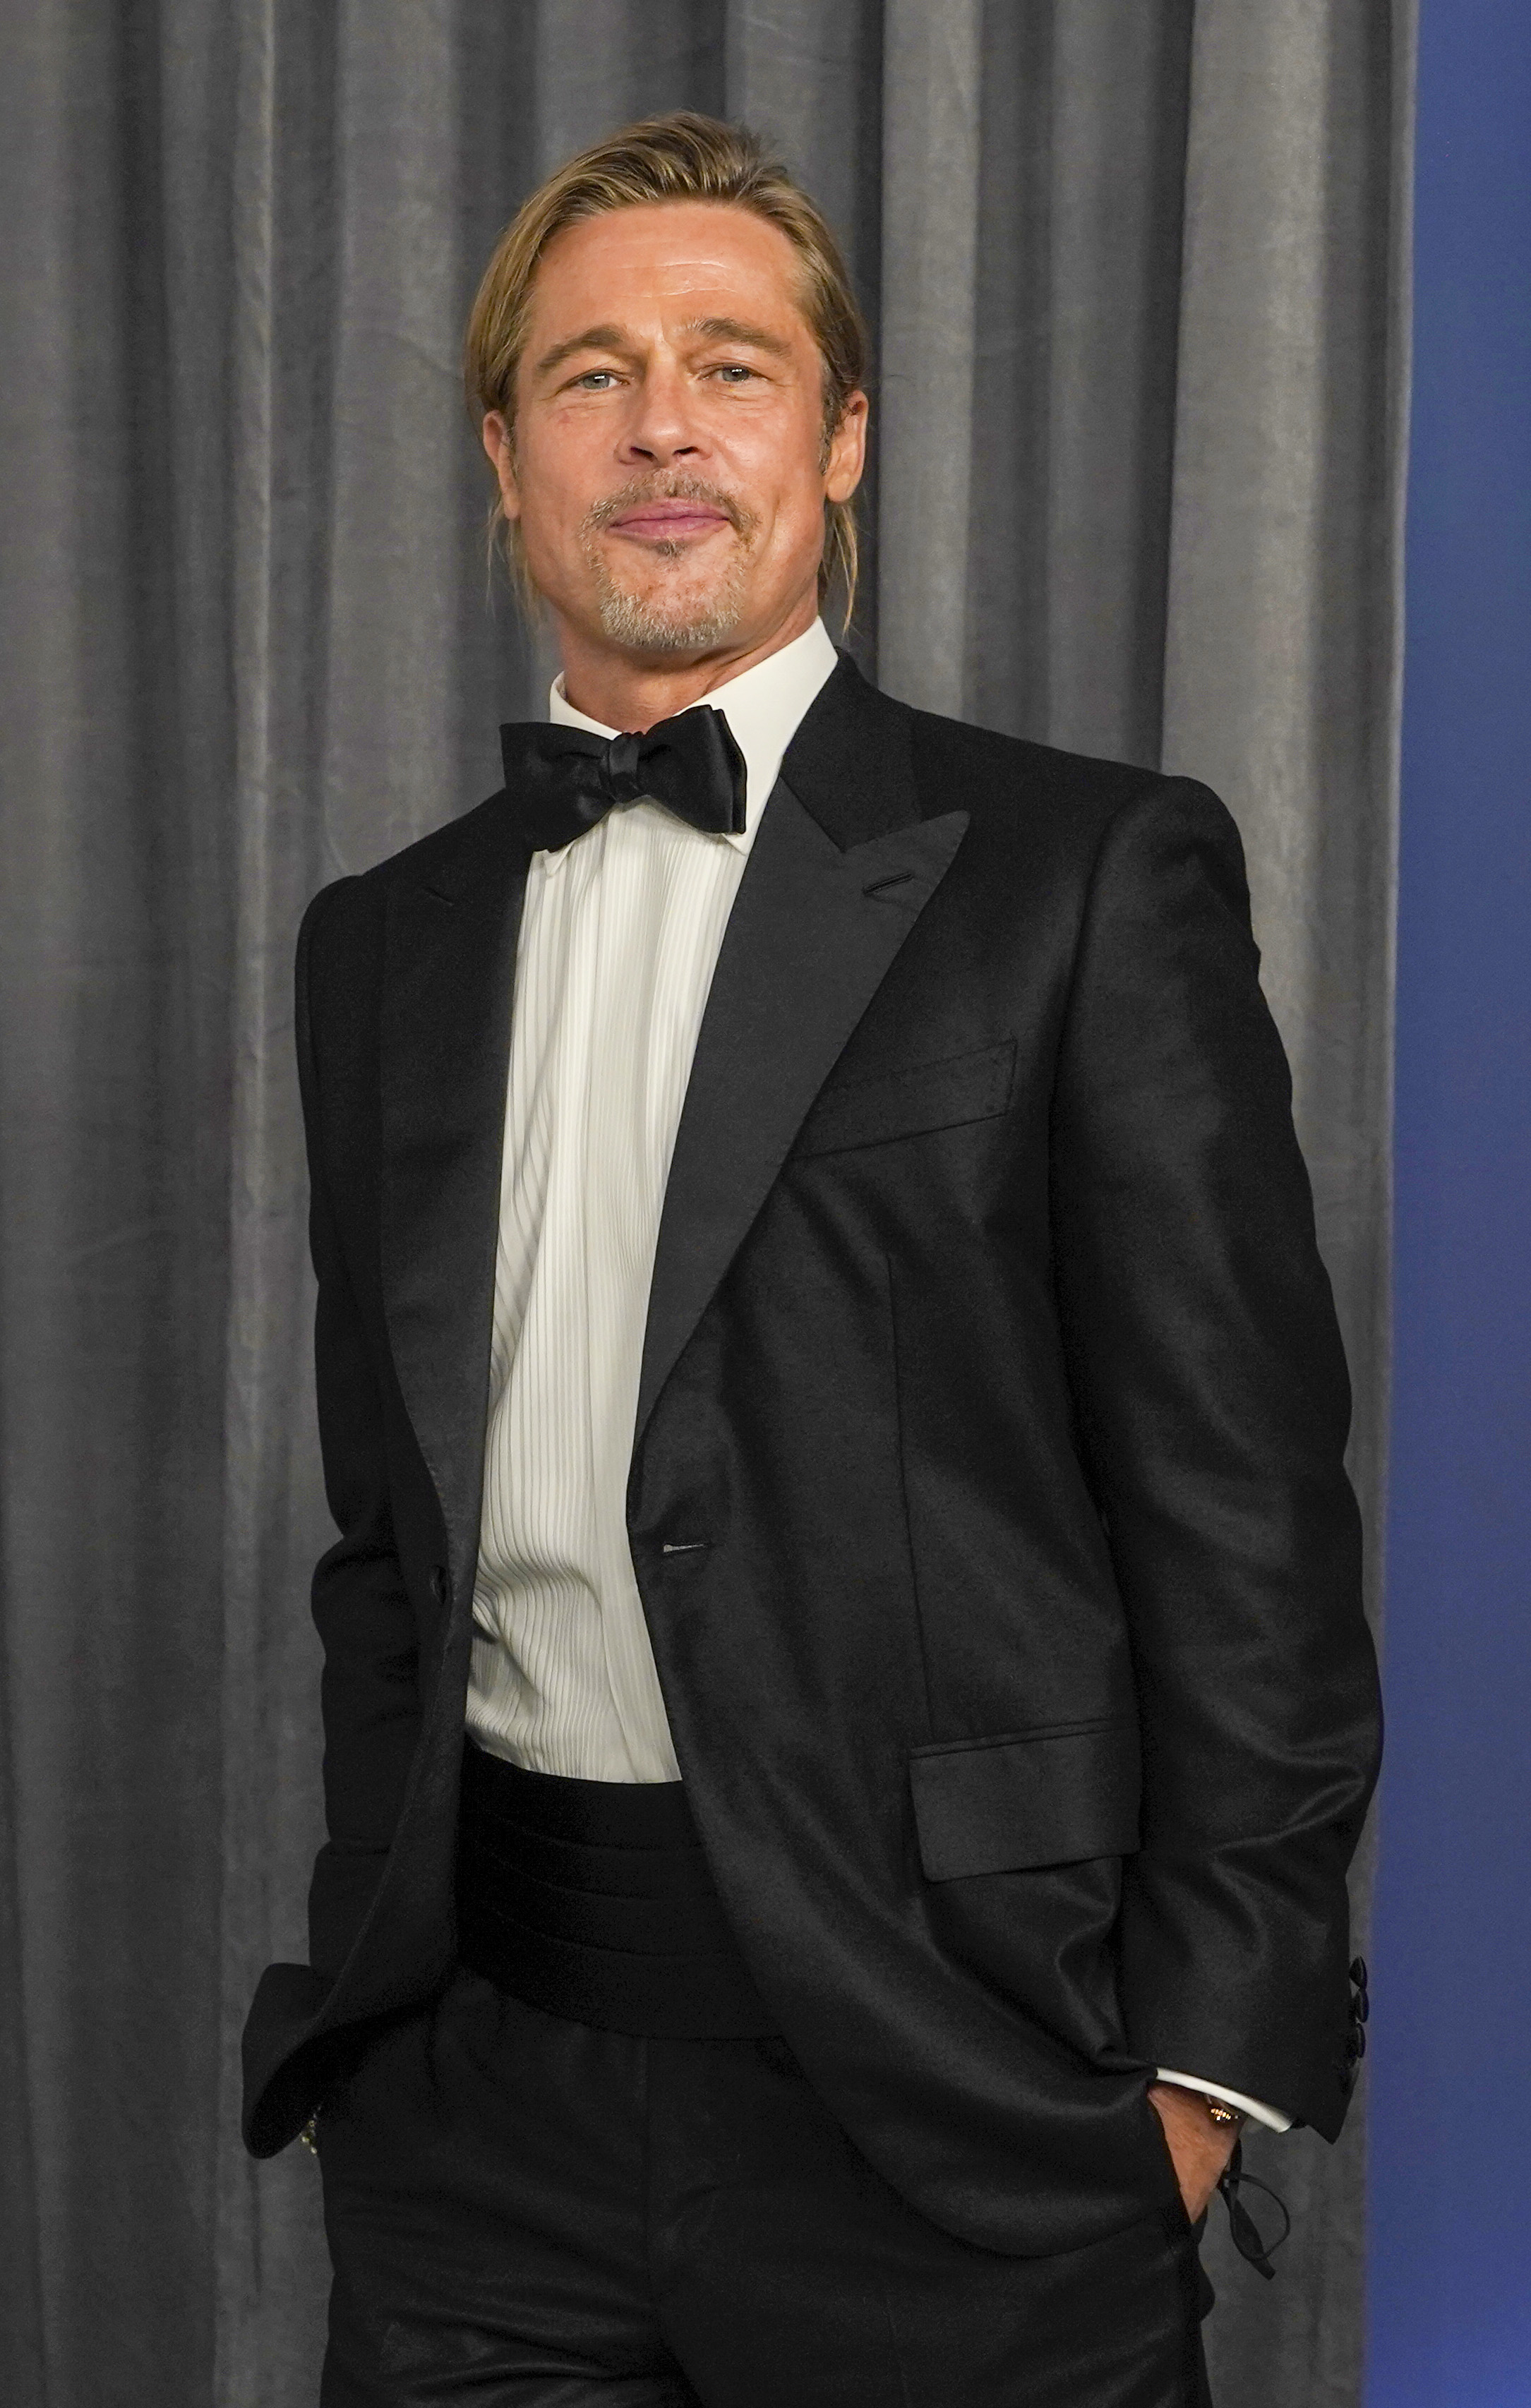 Brad Pitt at the 93rd Annual Academy Awards in Los Angeles, 2021 | Source: Getty Images